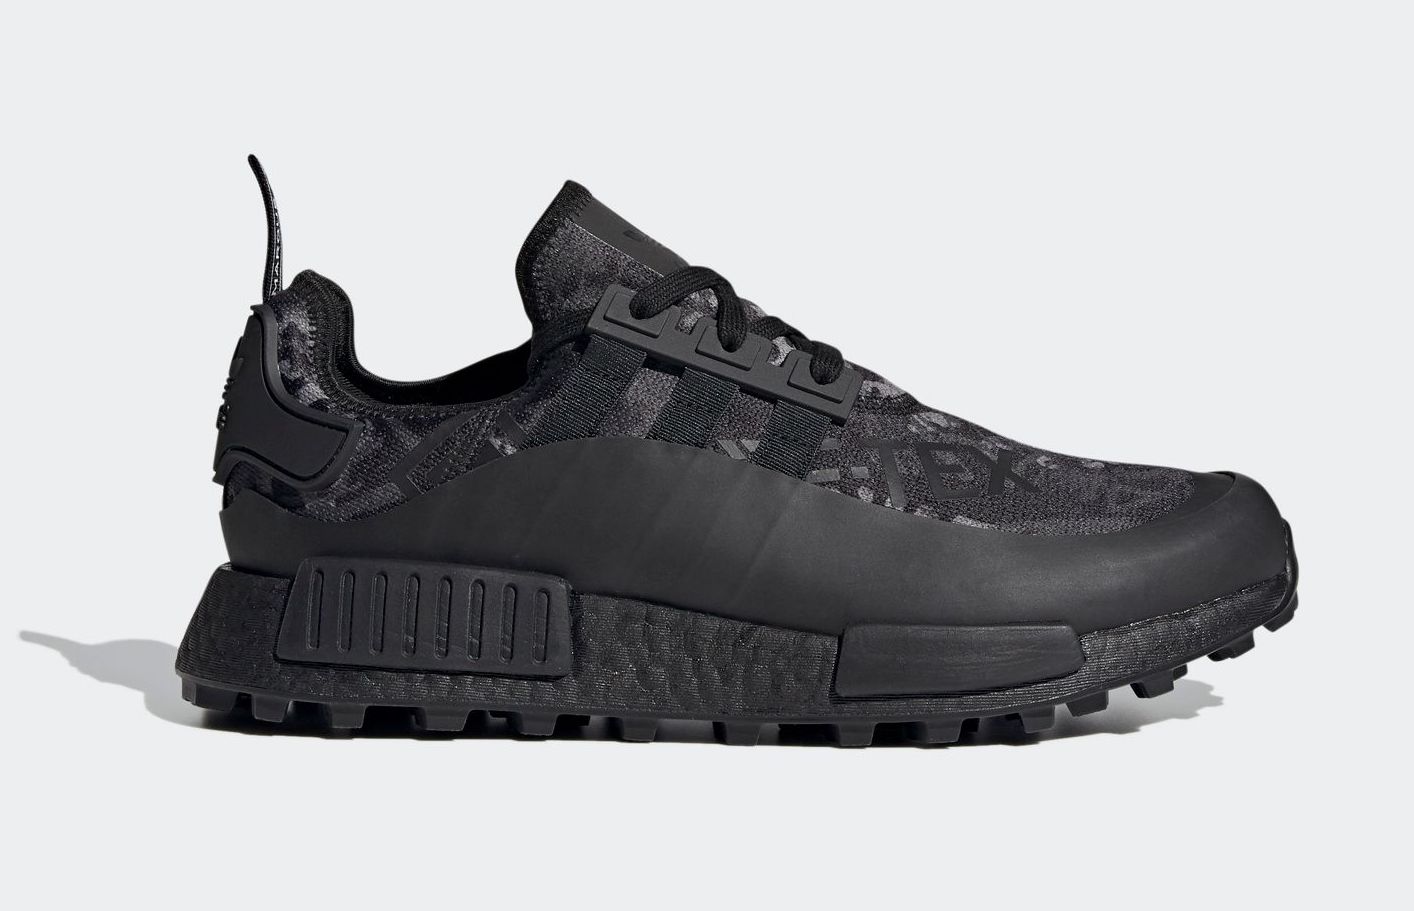 adidas NMD R1 Trail Gore-Tex in ‘Core Black’ Starting to Release